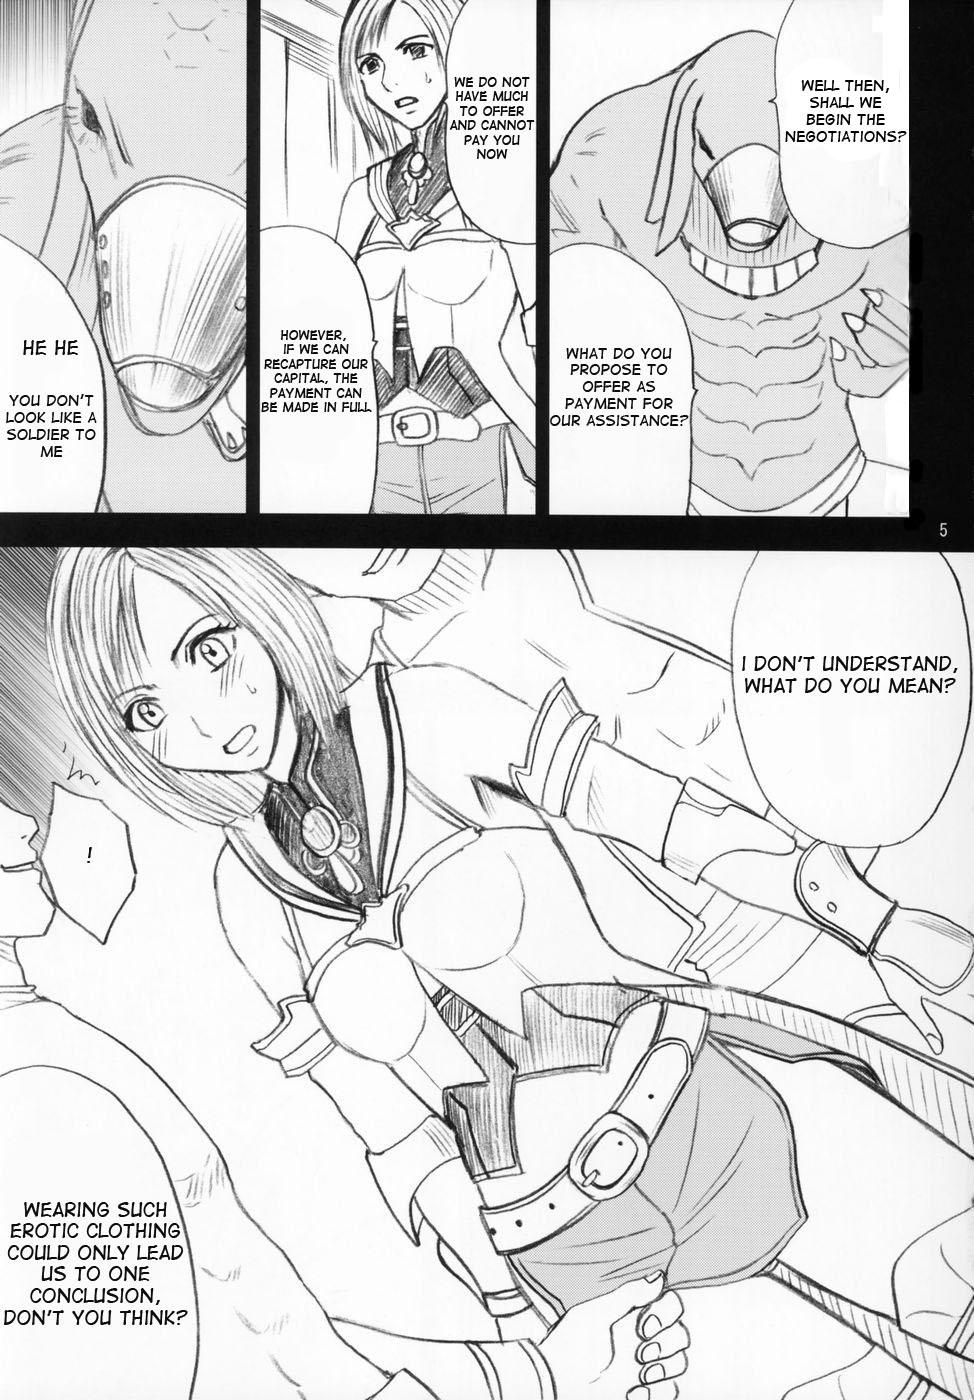 Exgf Revenge Or Freedom - Final fantasy xii Stepdaughter - Page 6